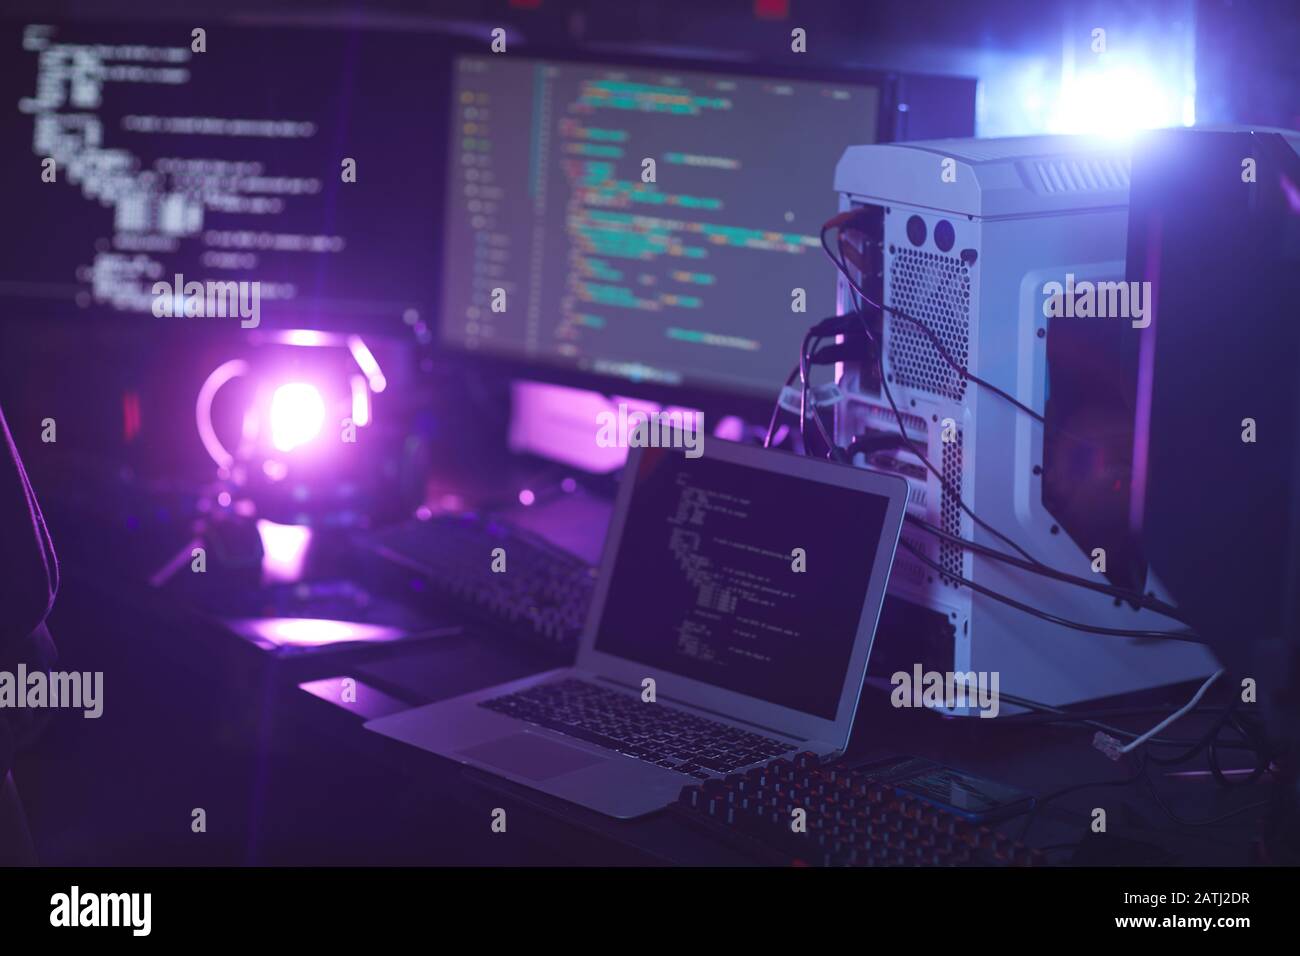 Background image of various computer equipment with programming code on screens in dark room, cyber security concept, copy space Stock Photo